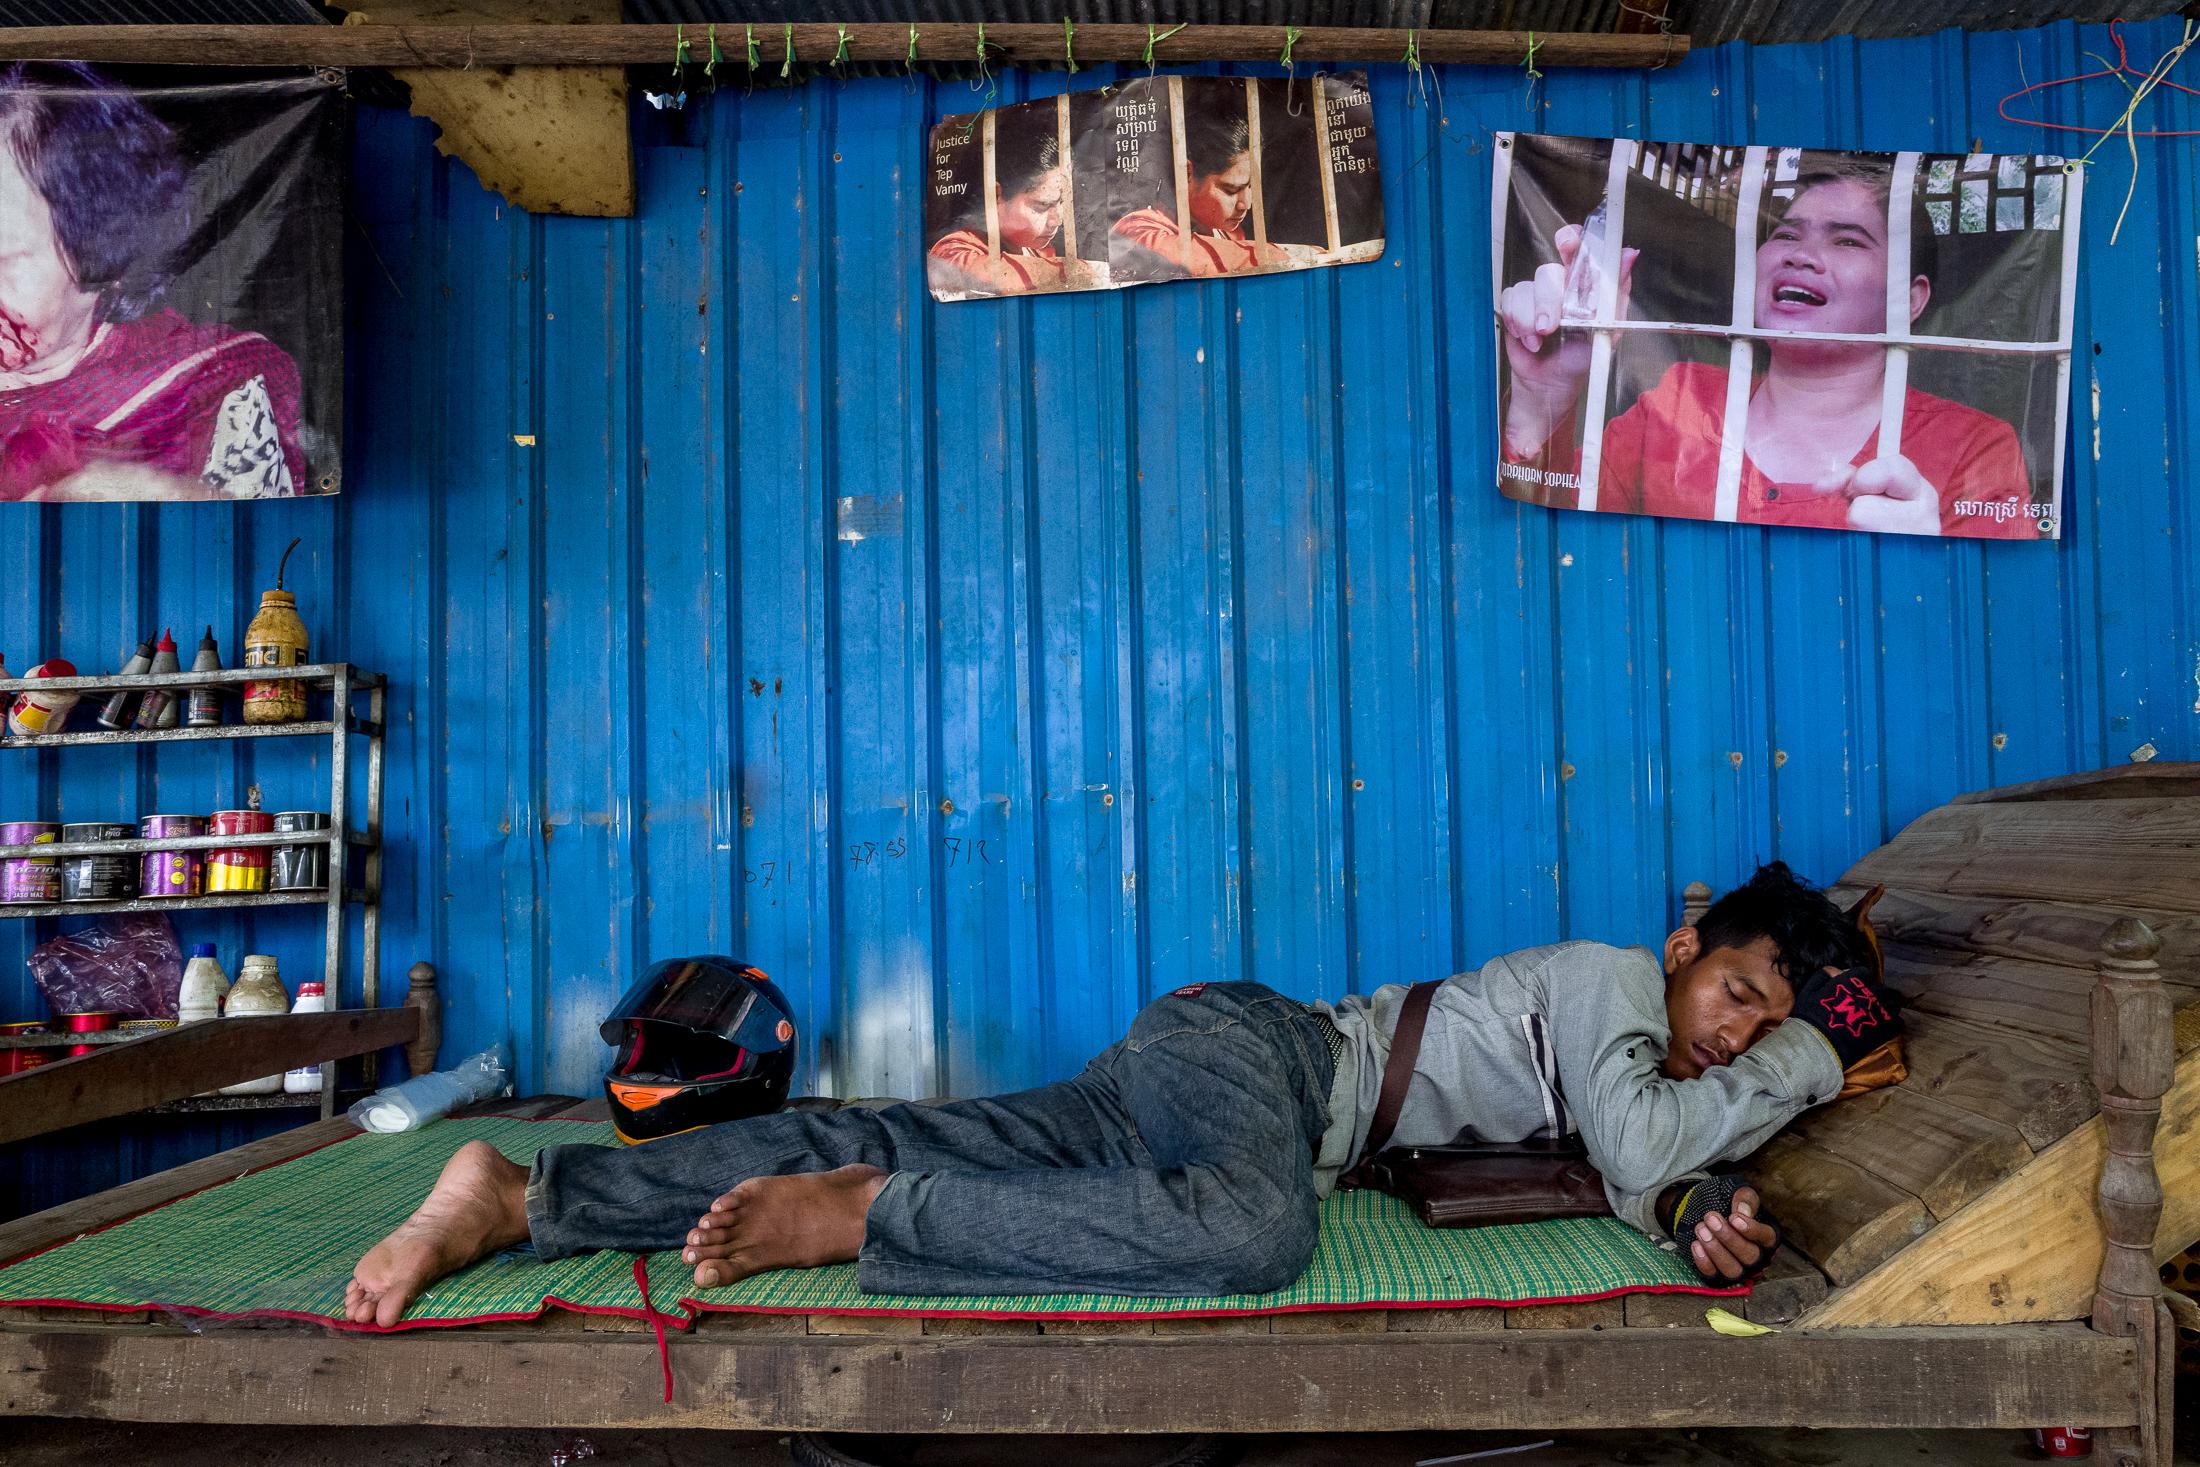 A woman's Cry: The detention of Tep Vanny - PHNOM PENH, CAMBODIA- SEPTEMBER 04: A young man sleeps in...